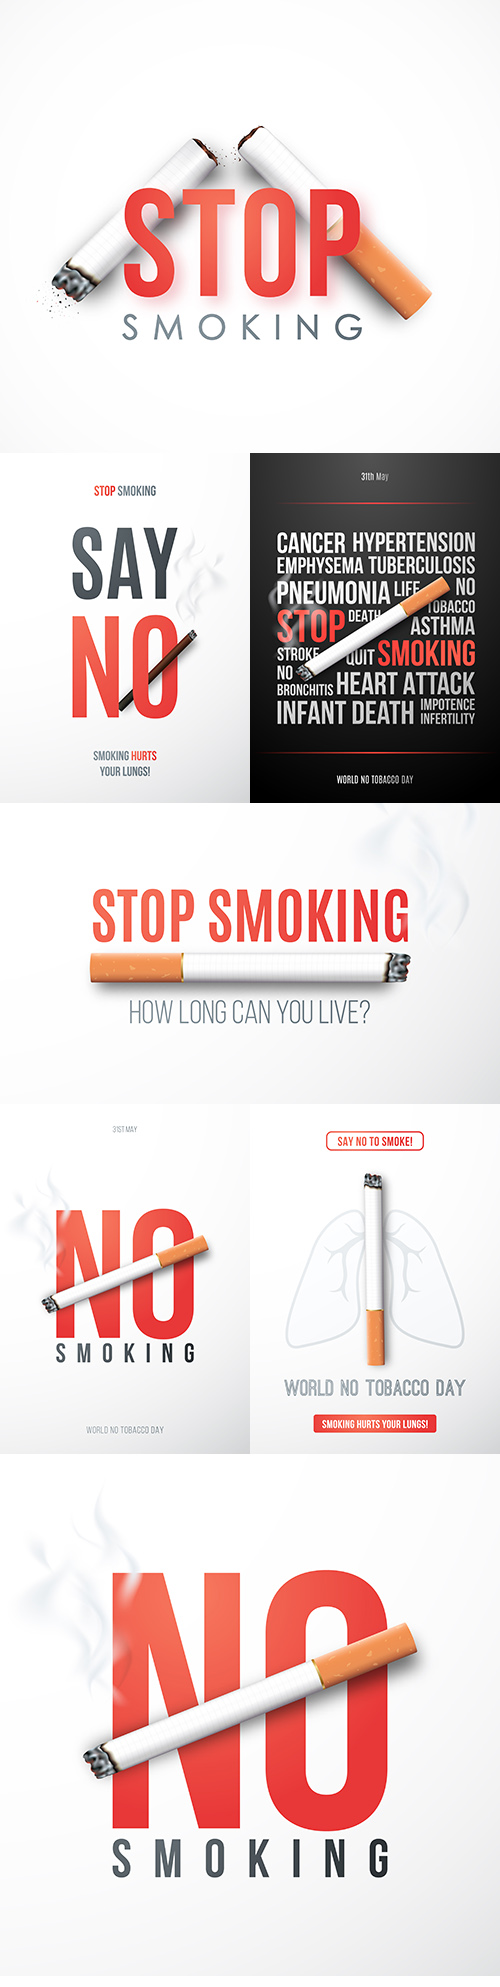 Quit smoking poster with realistic cigarette and text
